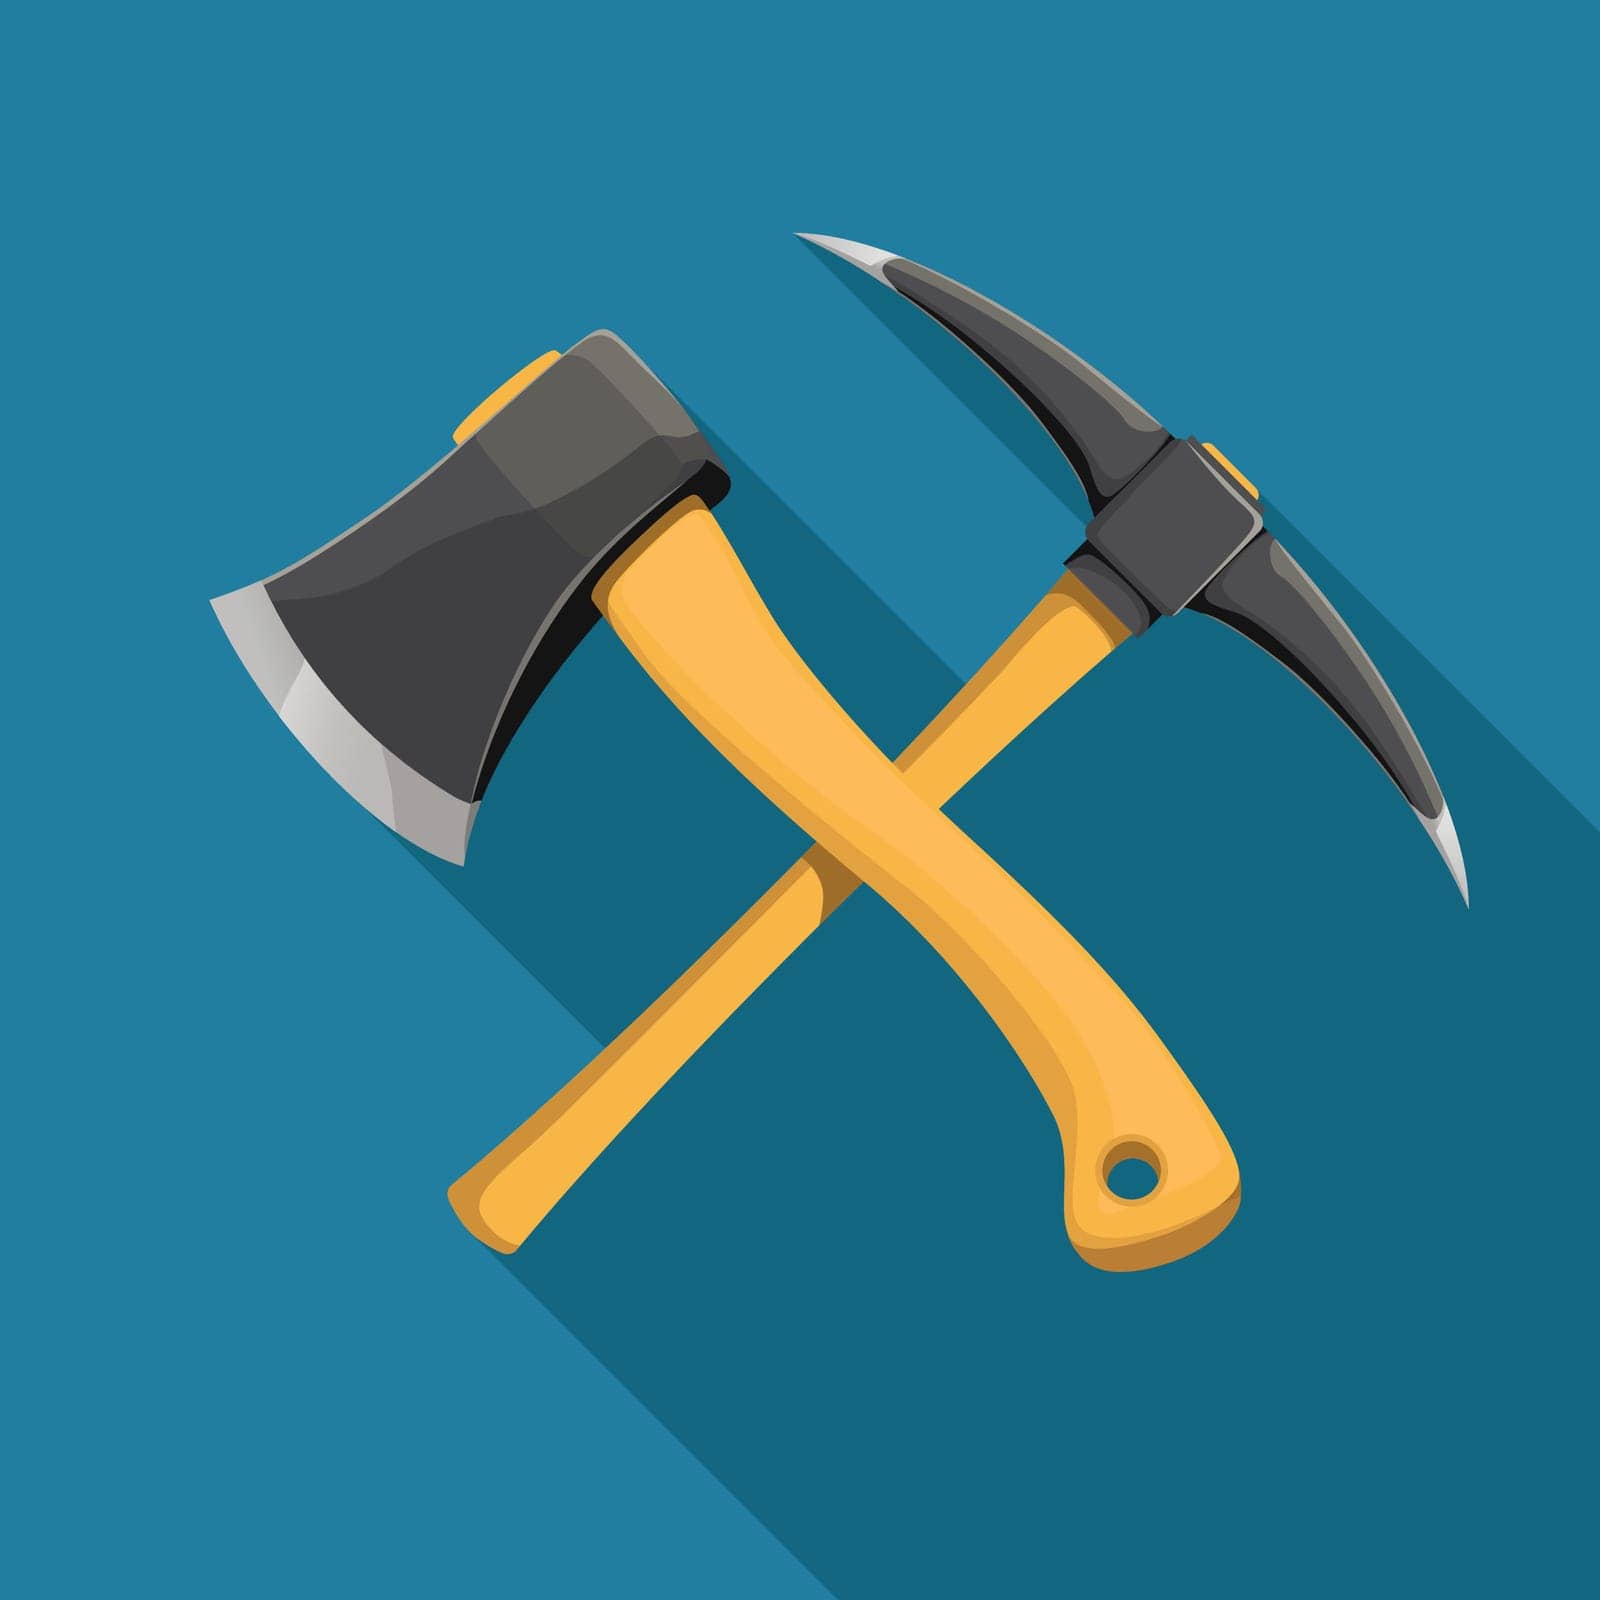 axe and pickaxe by IfH